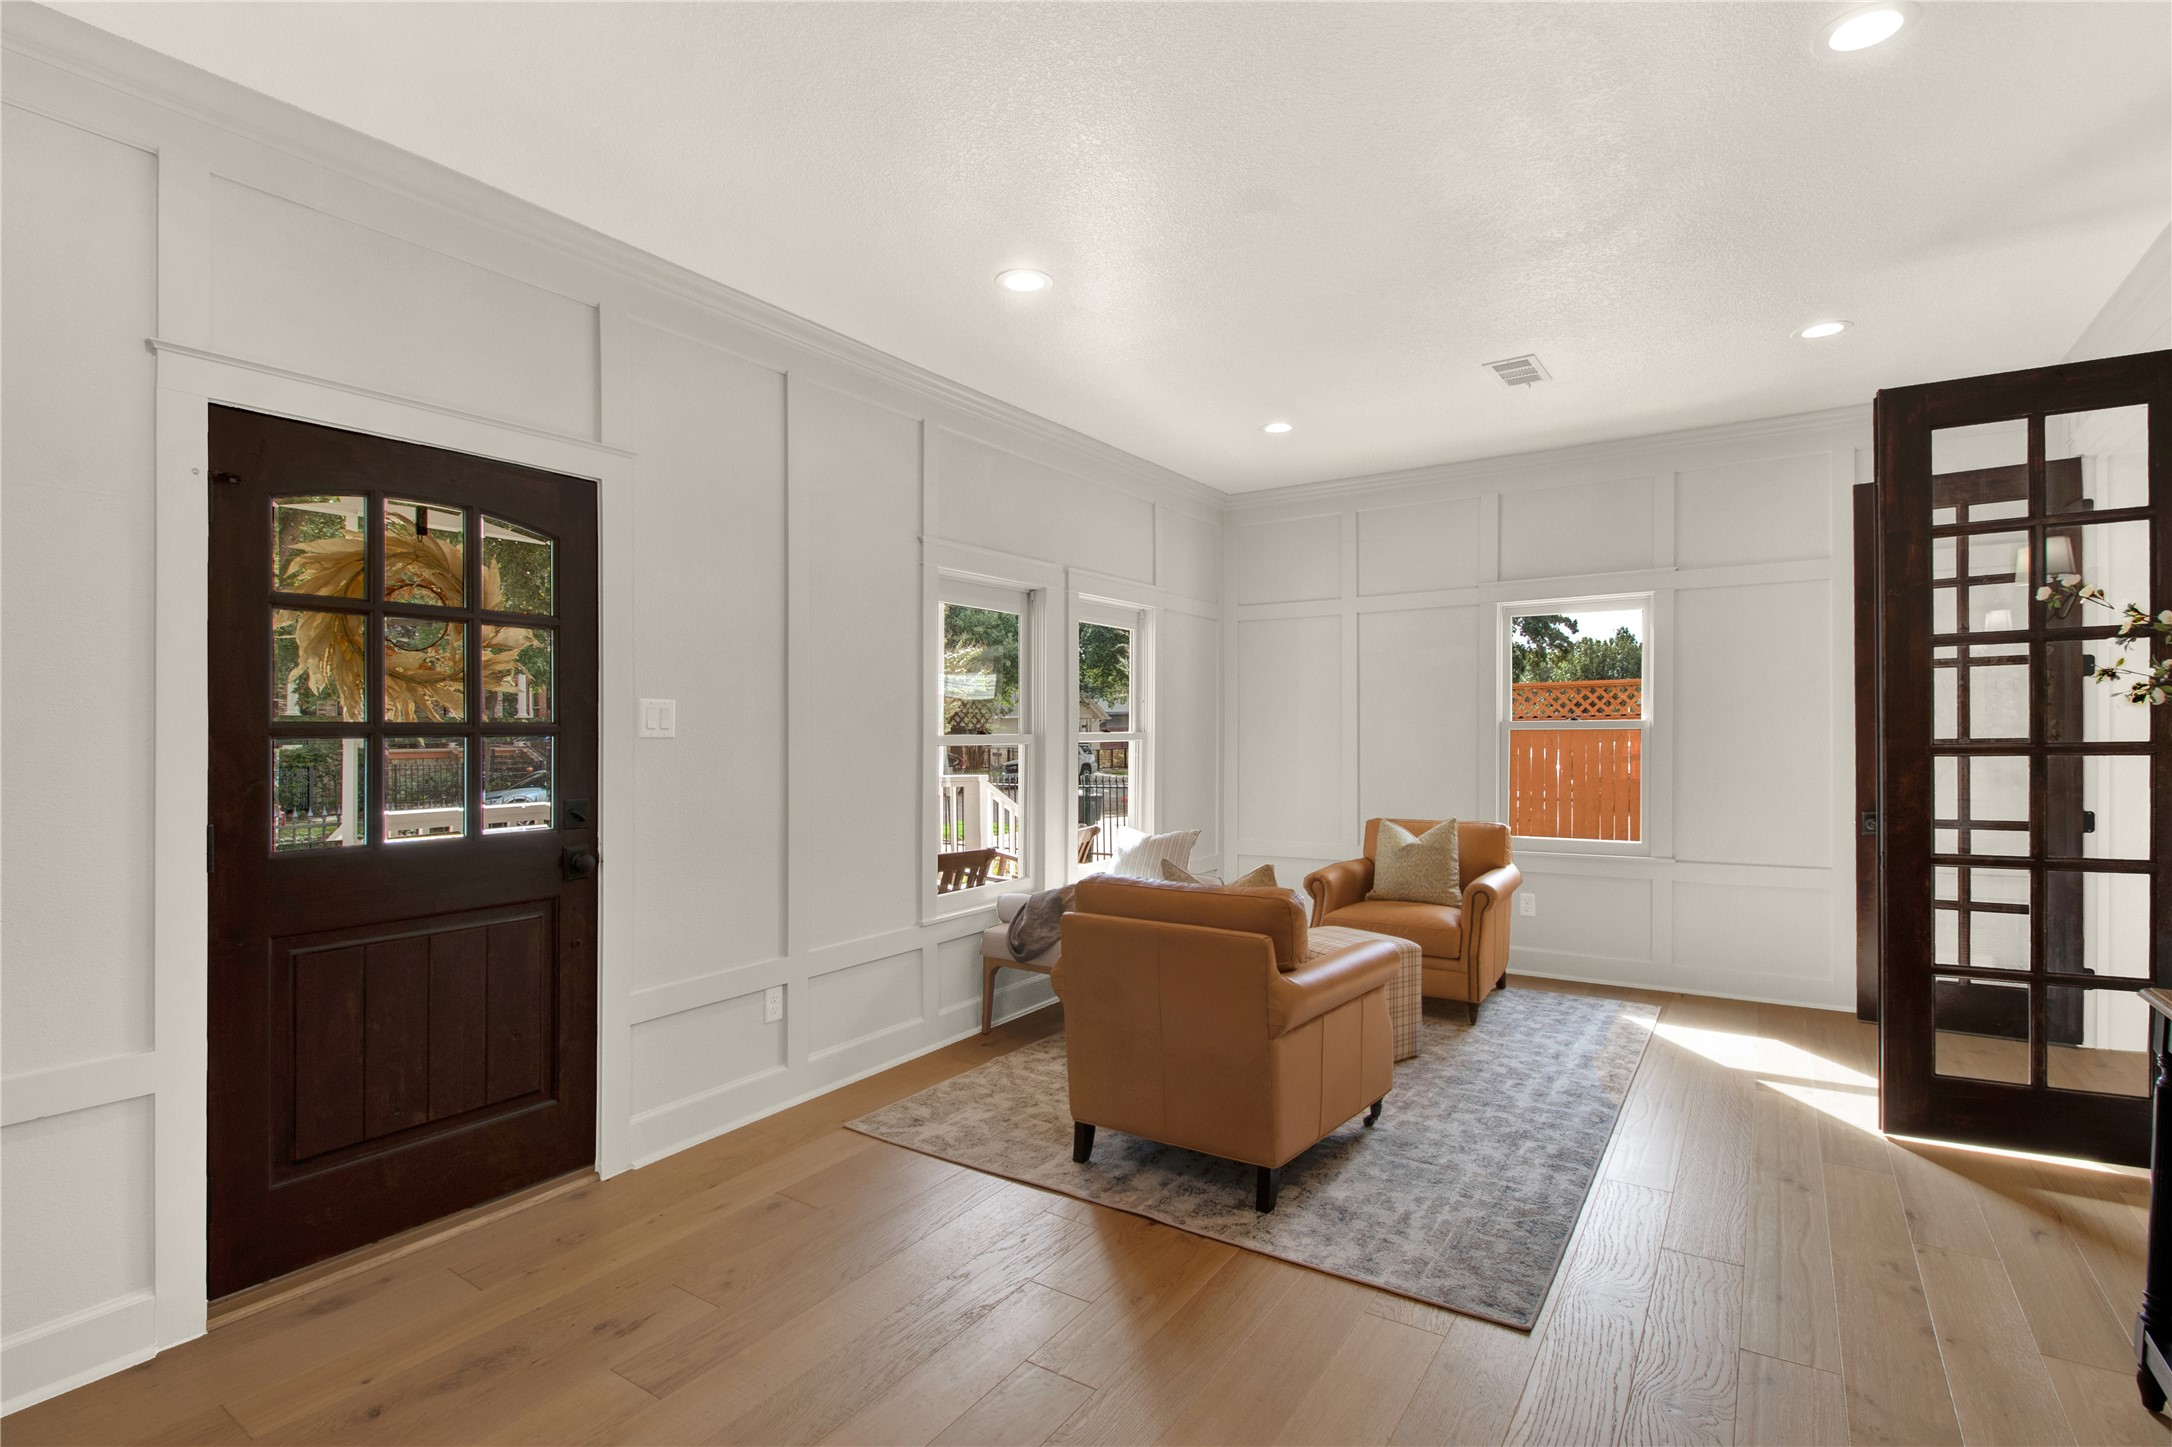 The original picture windows on three walls provide ample natural light.  Decorative millwork, recessed lighting and the imposing double French doors complete the space and compliment the vintage feel in this room.